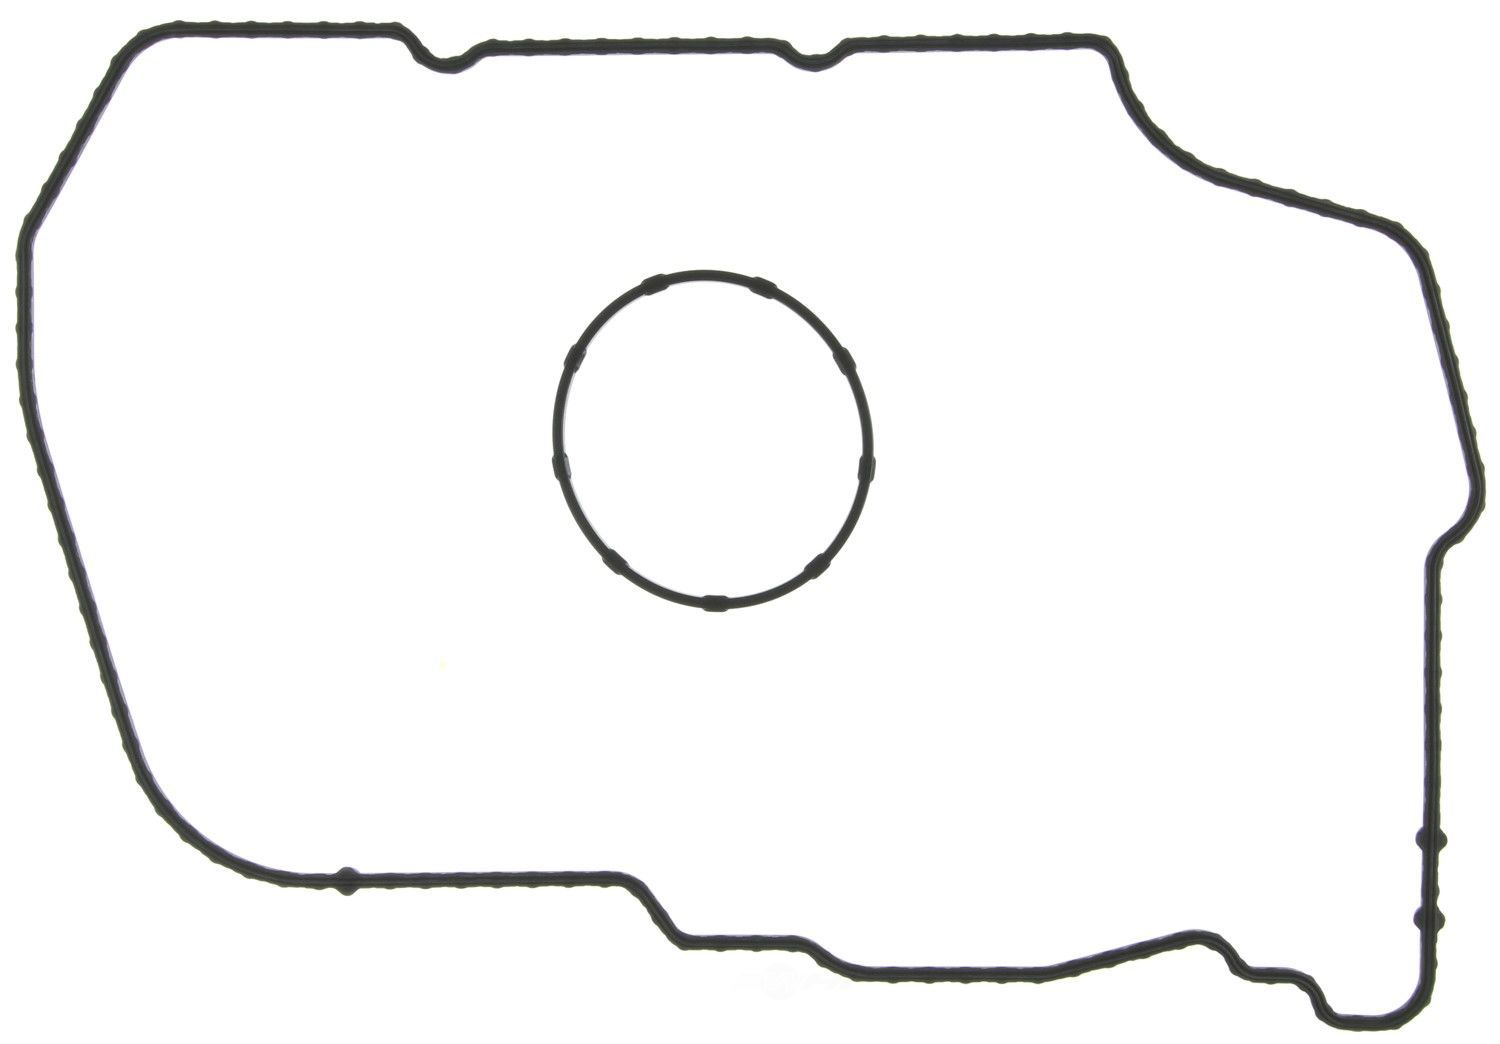 MAHLE ORIGINAL - Automatic Transmission Valve Body Cover Gasket - MHL W33208